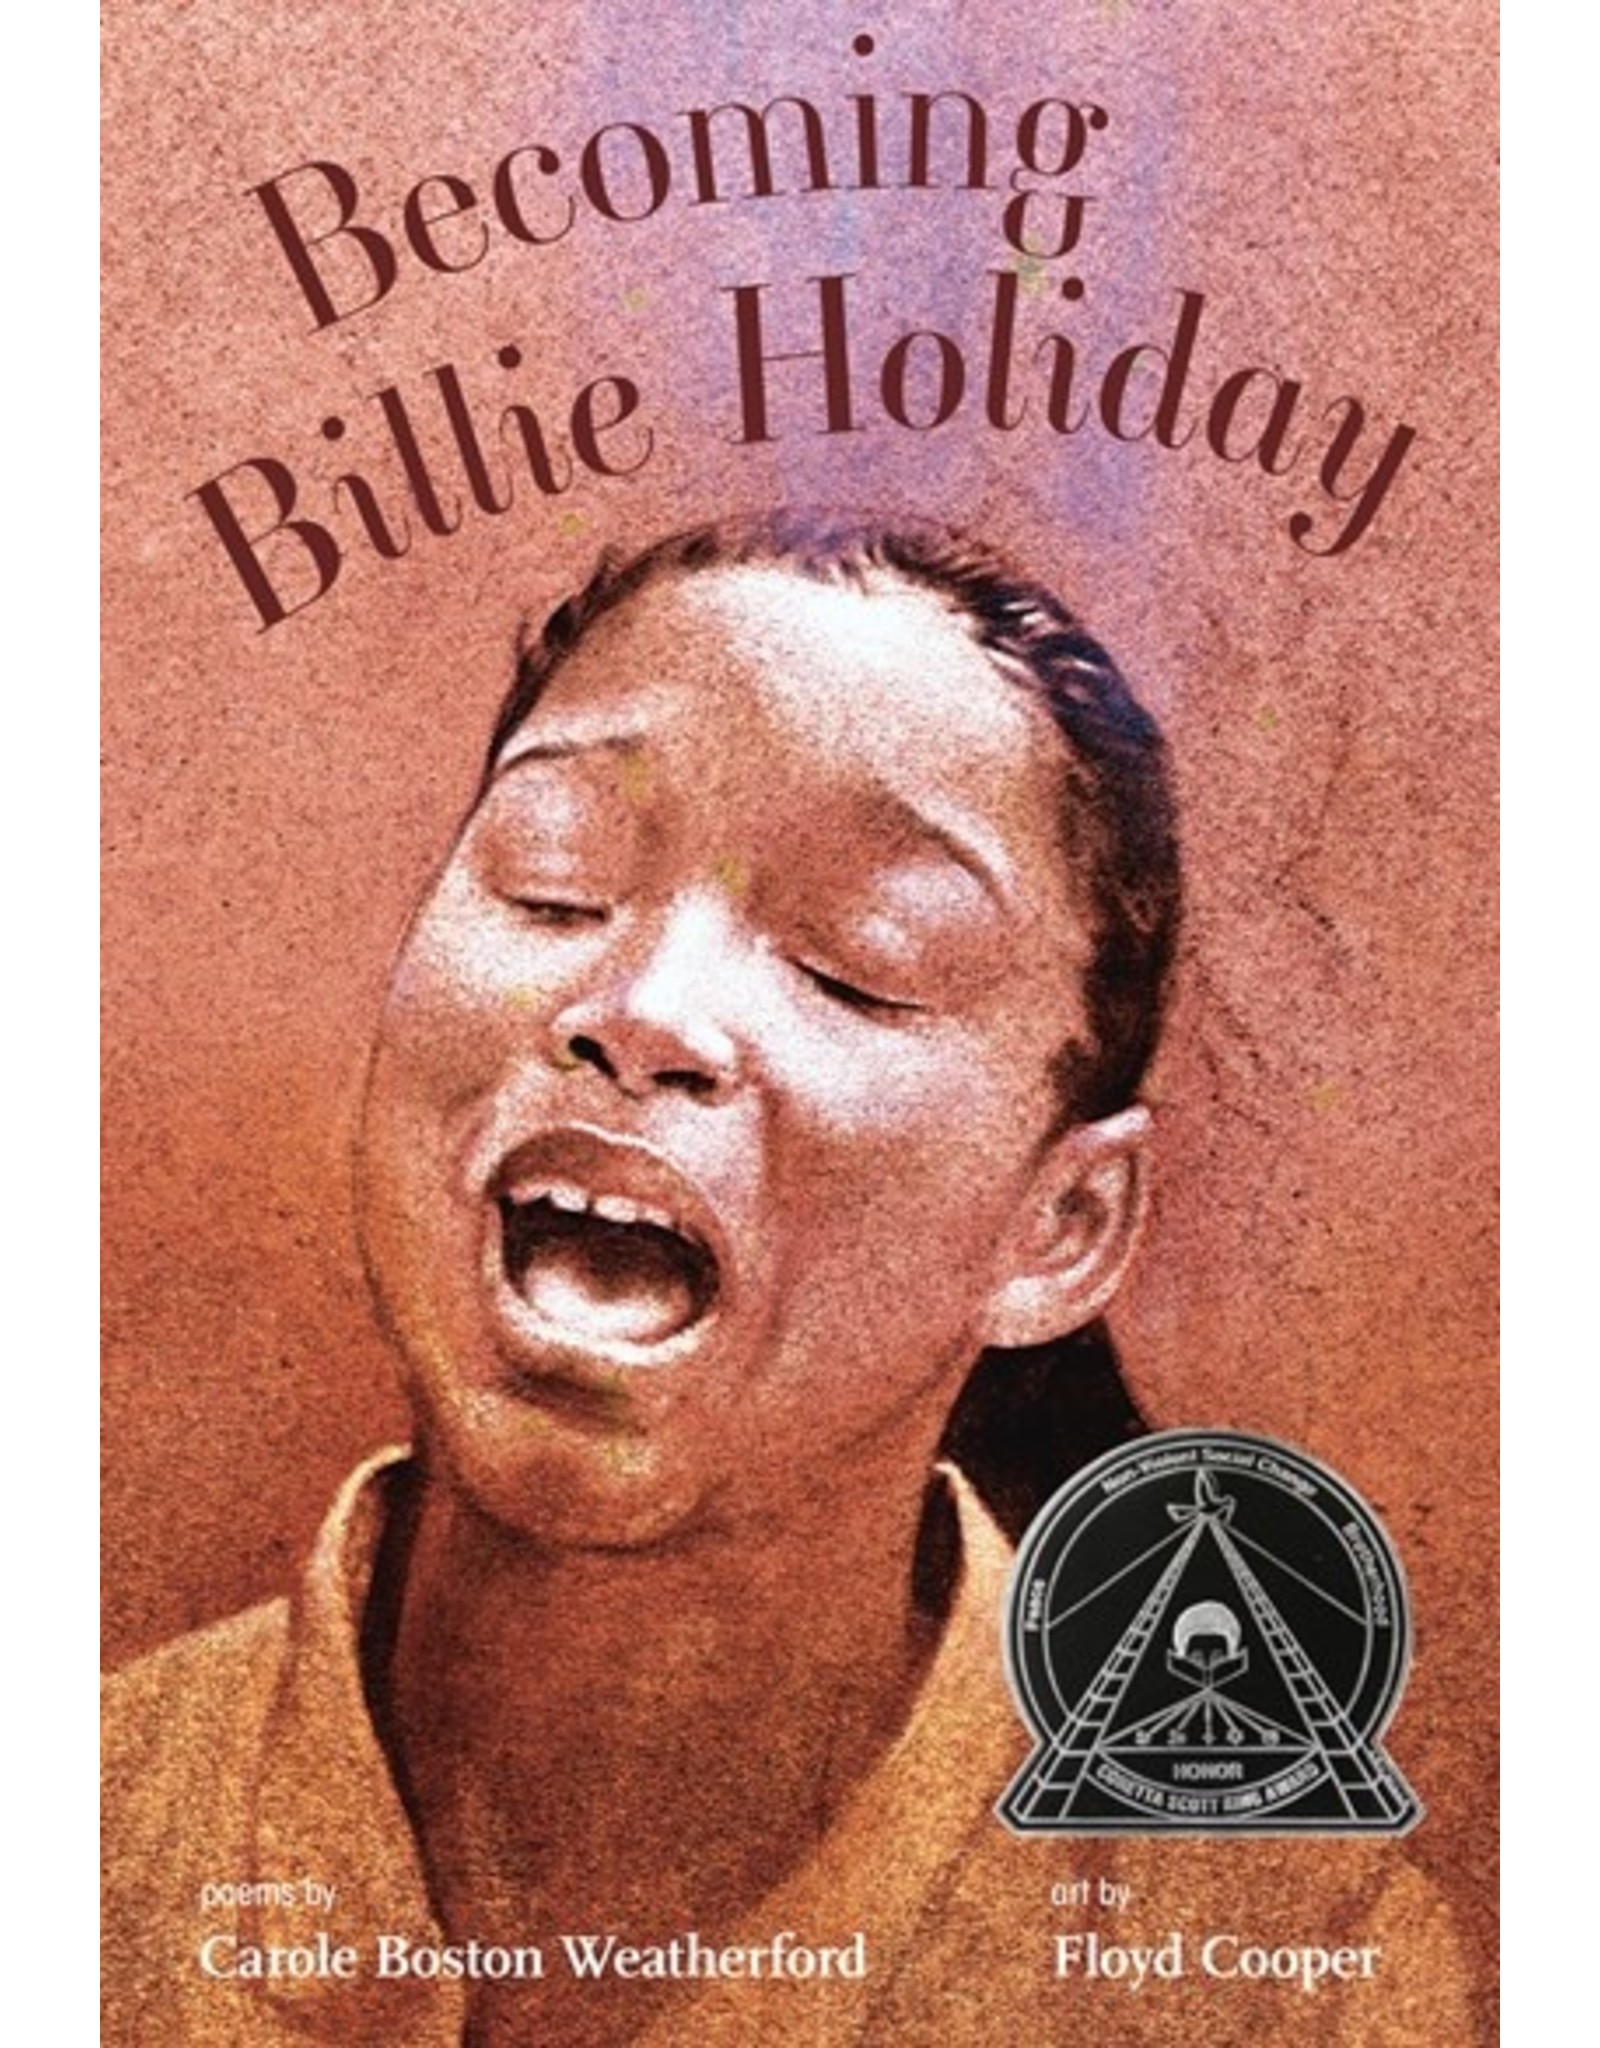 Books Becoming Billie Holiday by Carole Boston Weatherford  art by Floyd Cooper